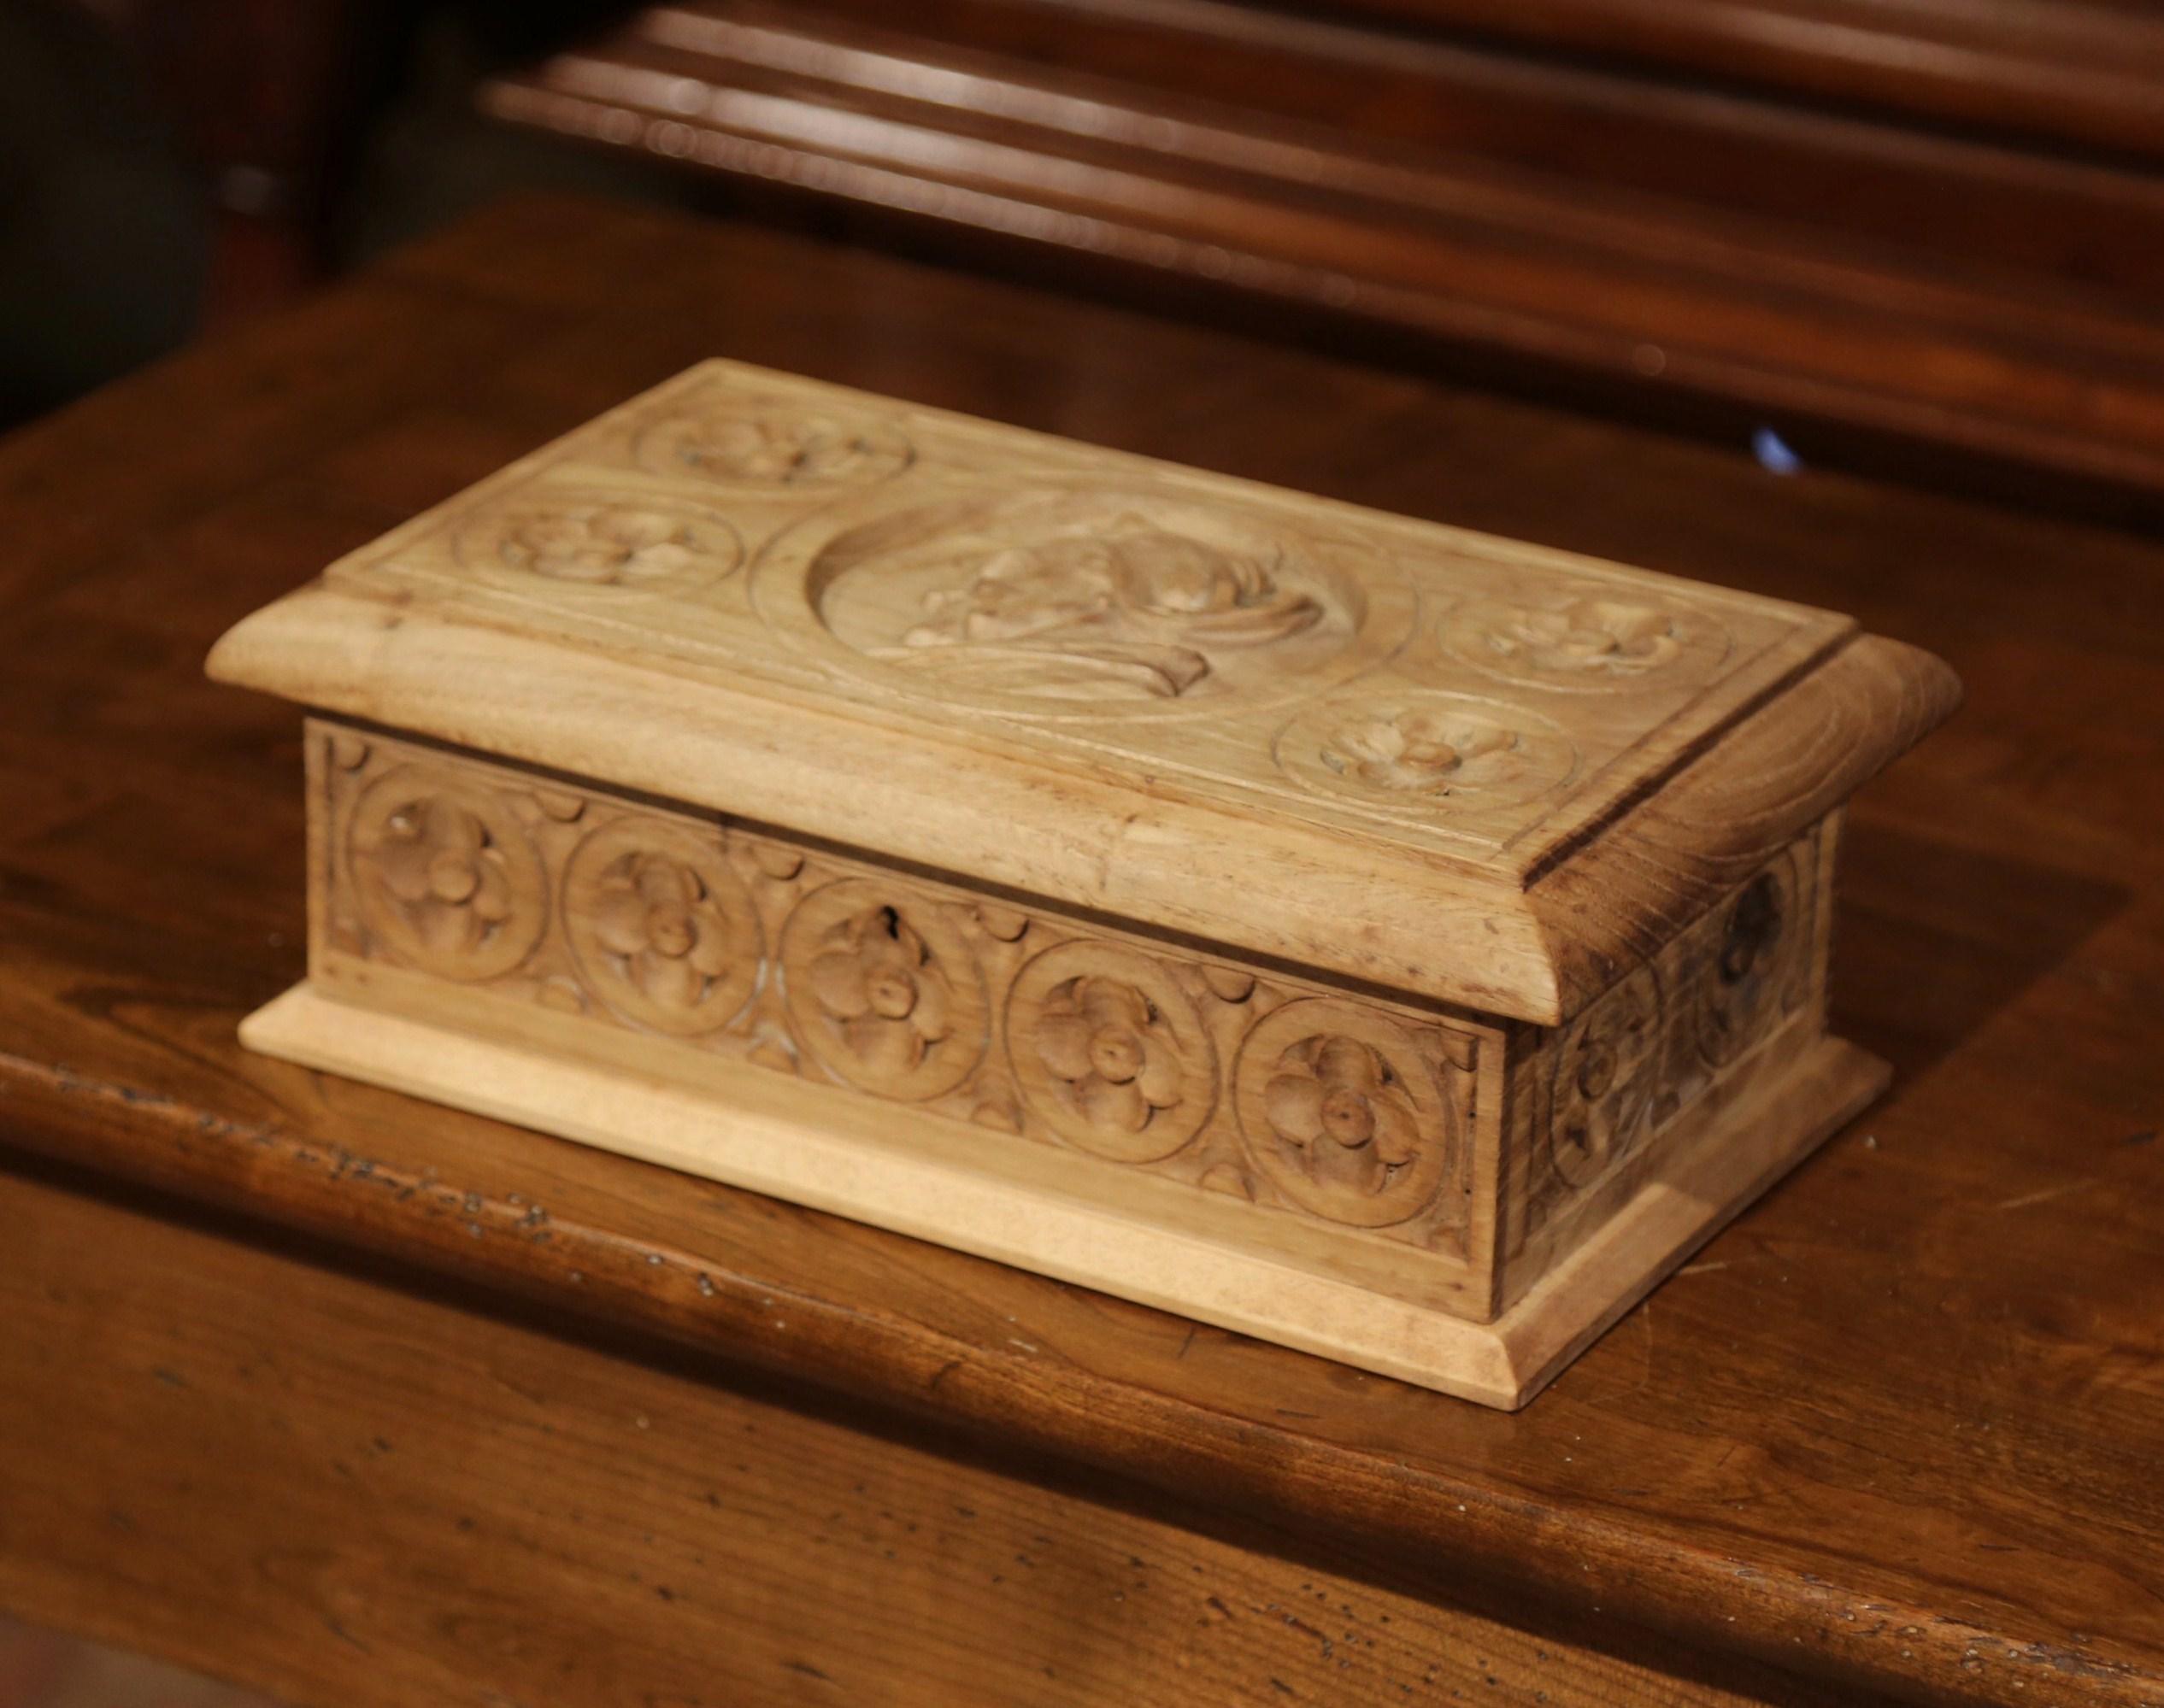 Early 20th Century French Carved Chestnut Box from Brittany Signed E. Bayon In Excellent Condition For Sale In Dallas, TX